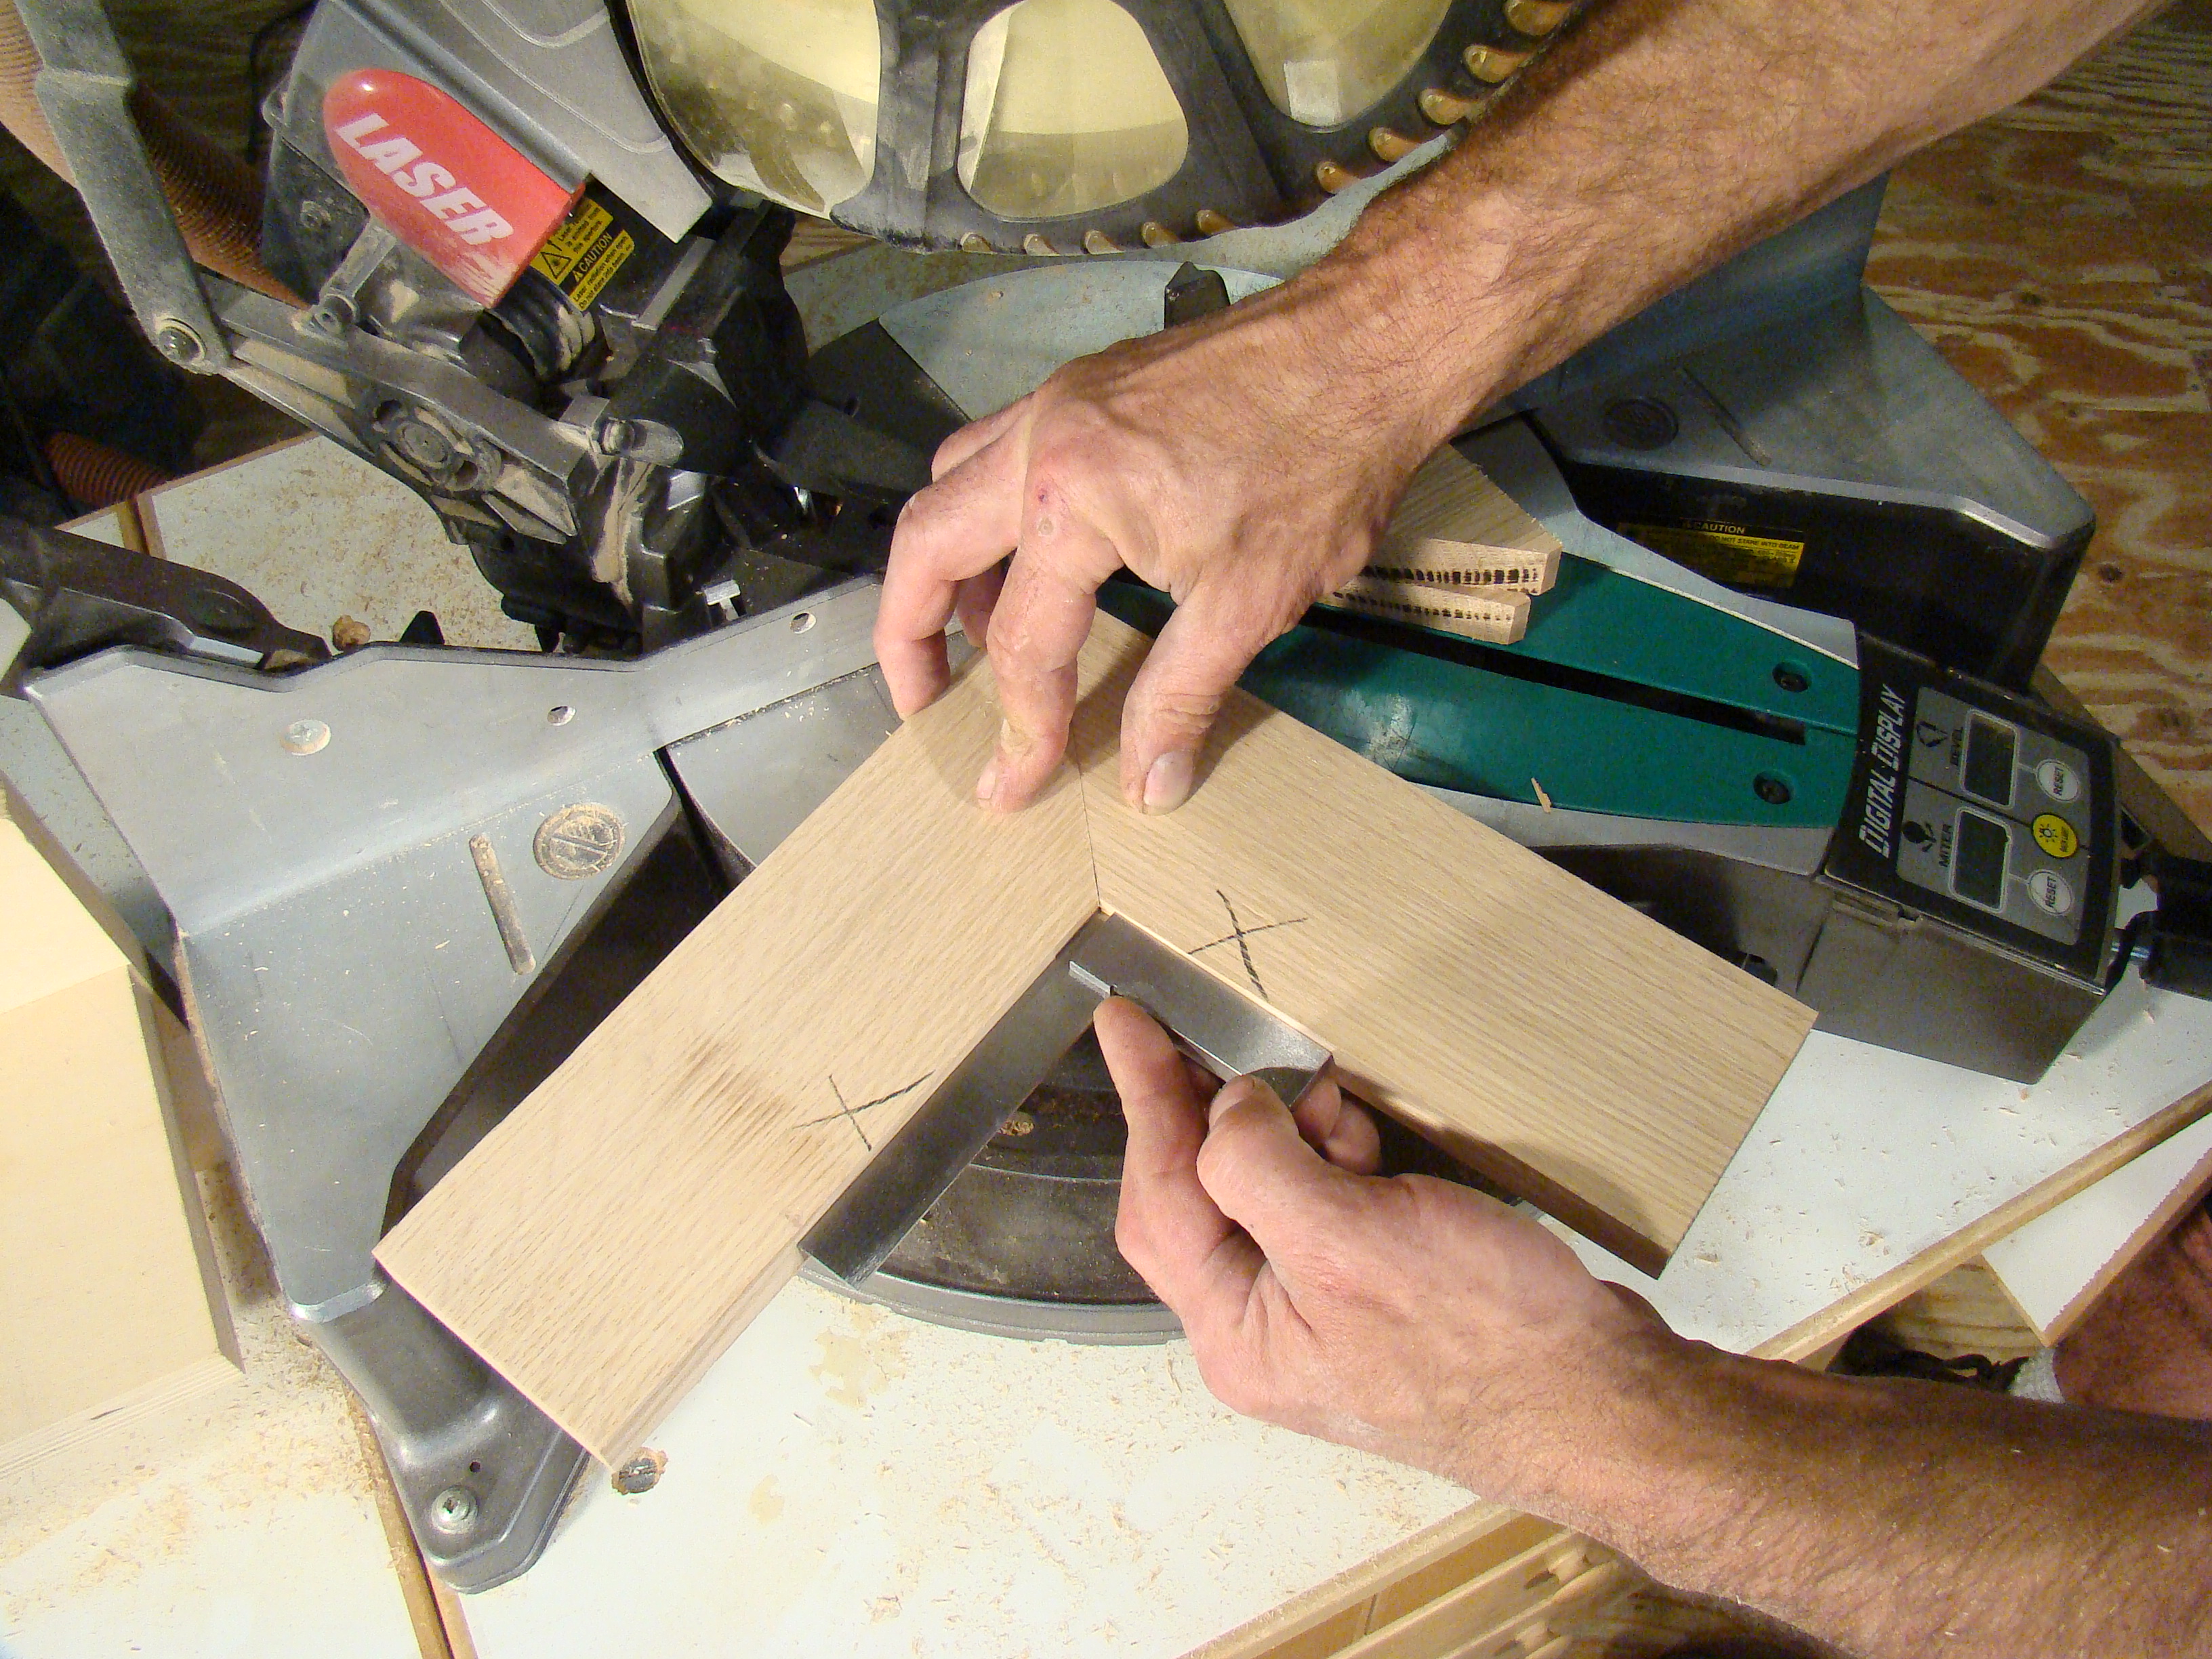 Setting up a miter saw